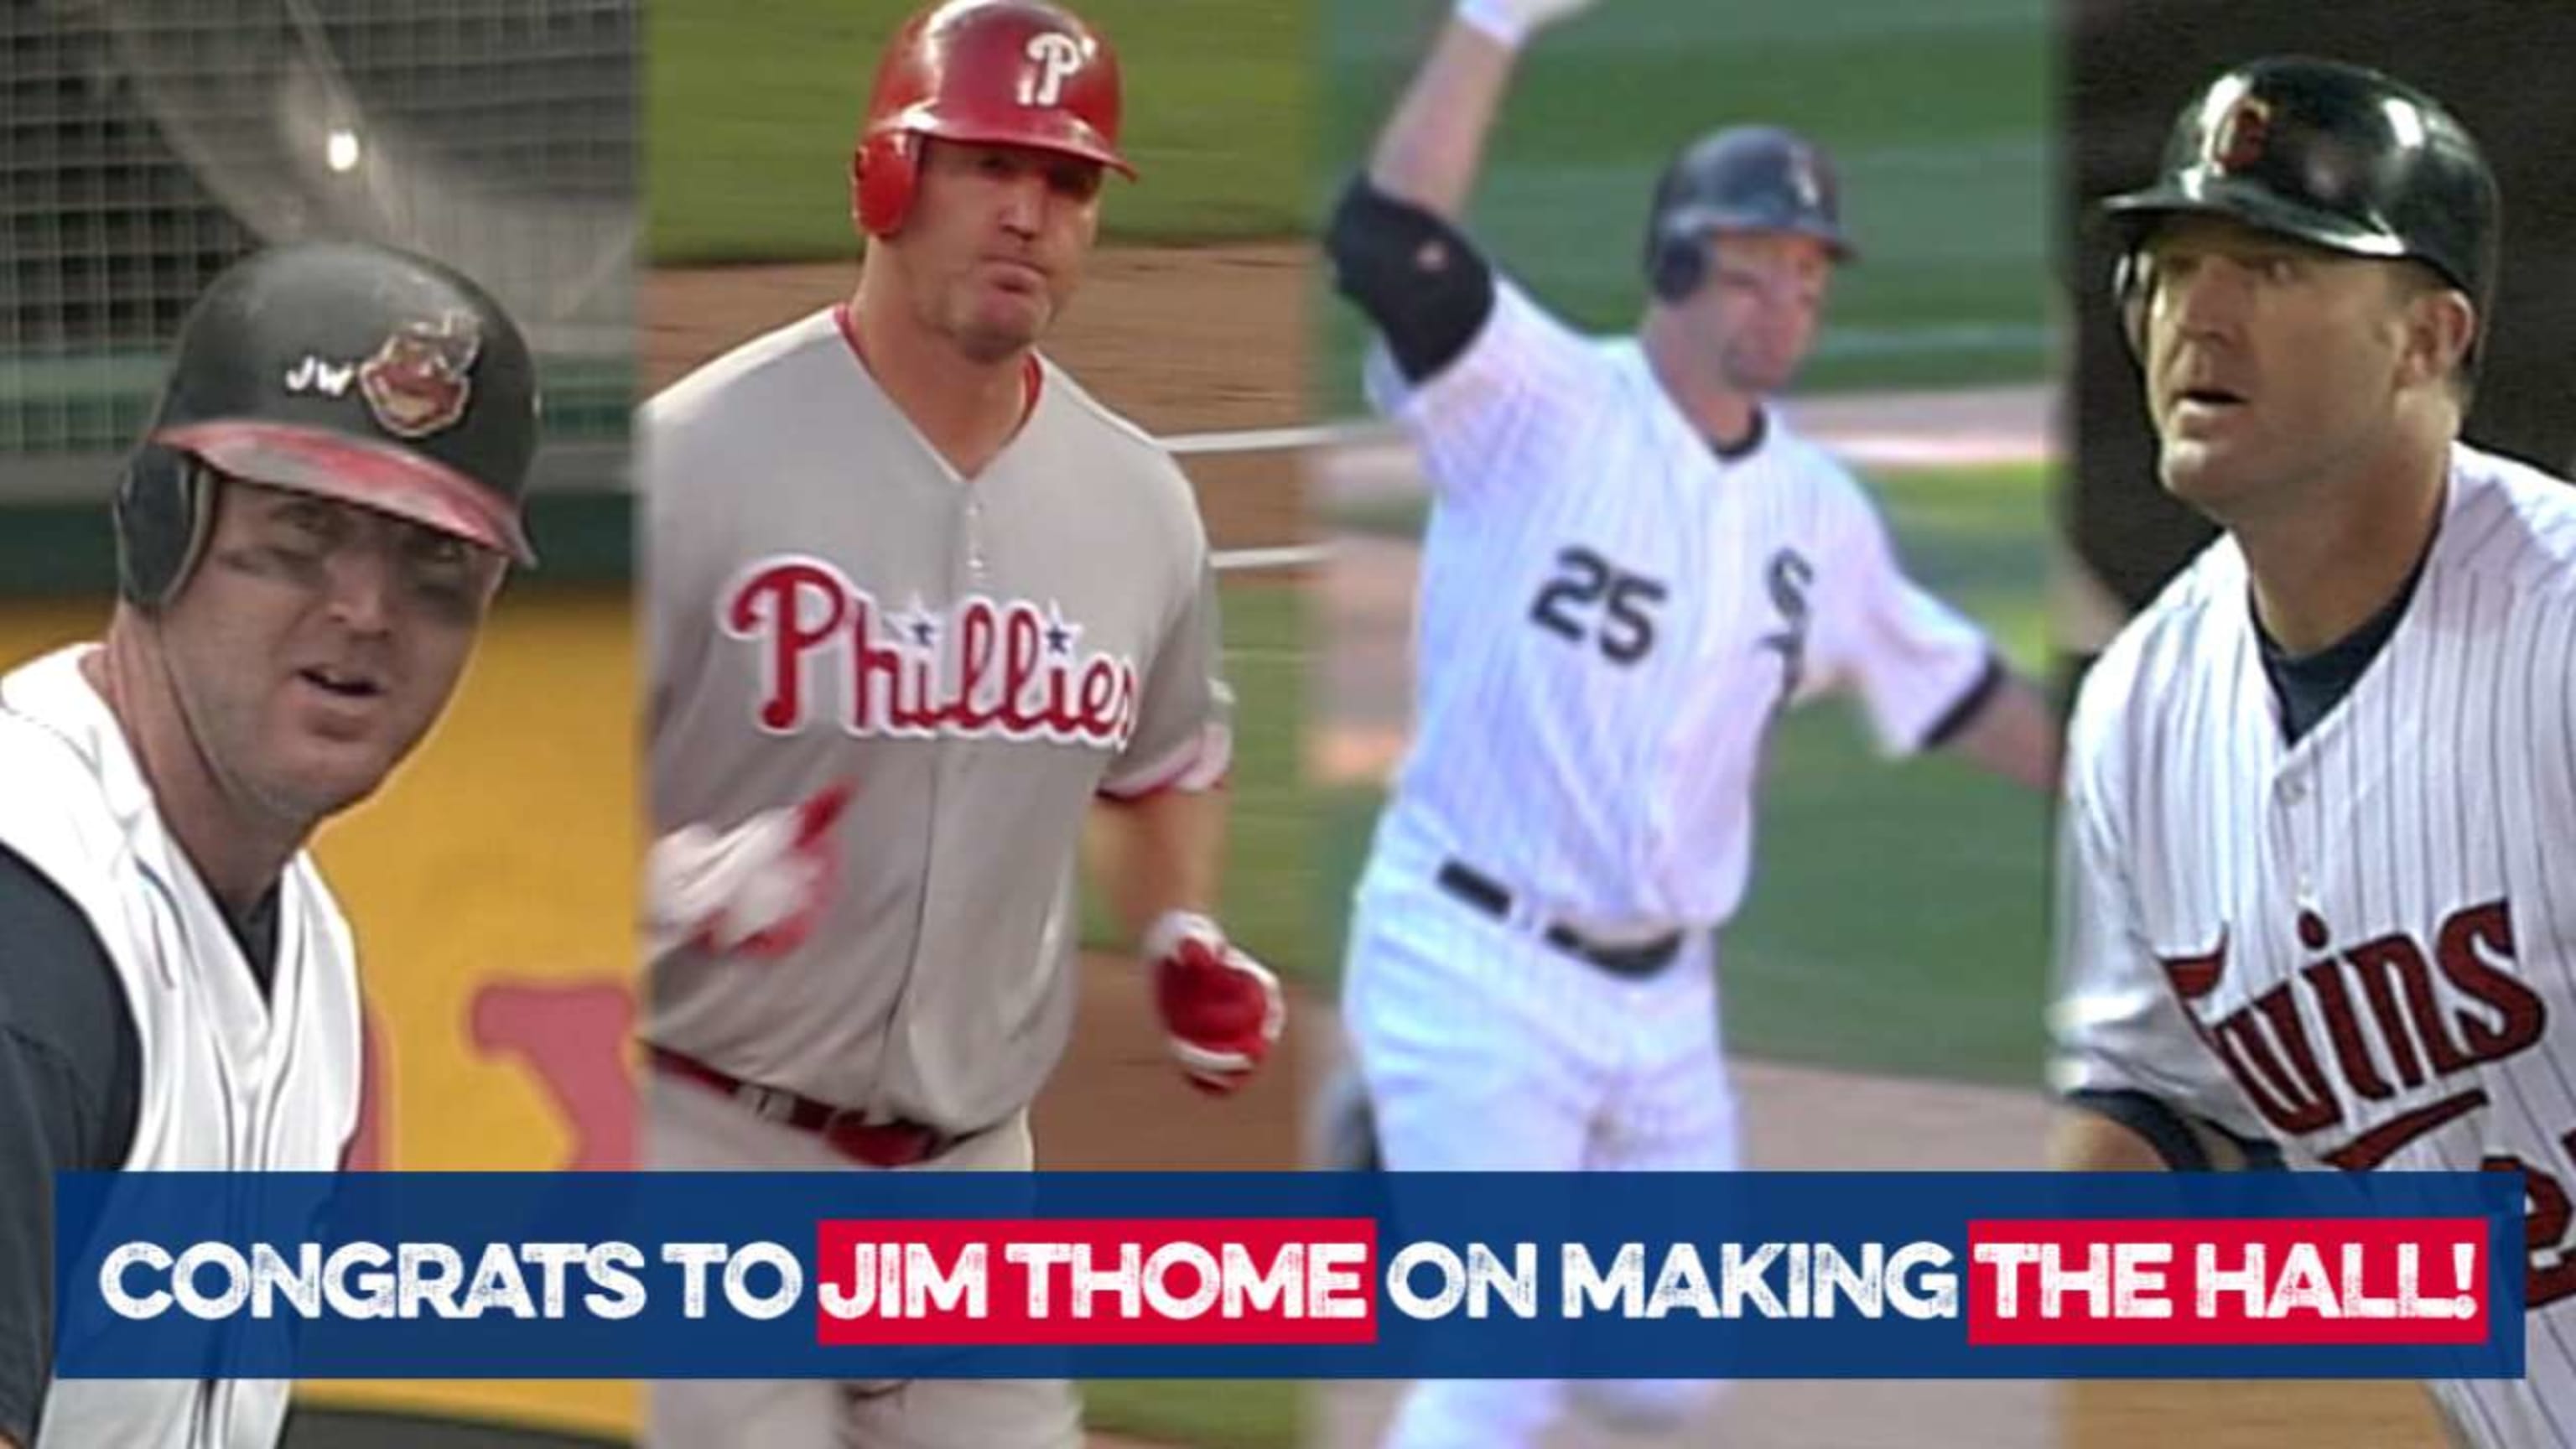 Is Jim Thome a Hall of Famer?